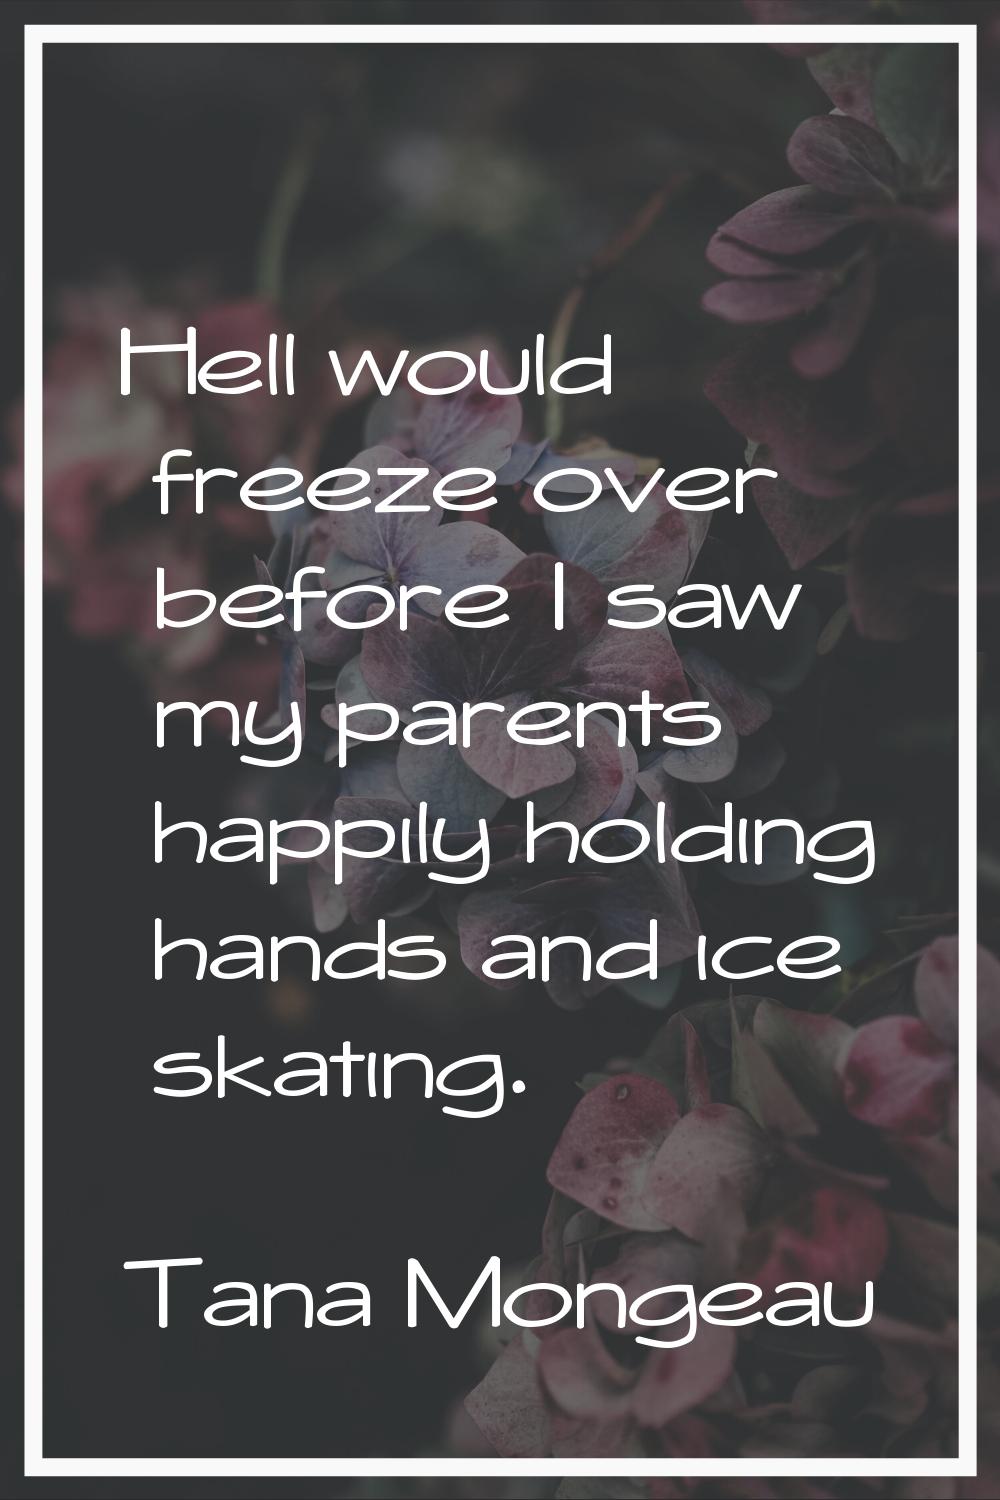 Hell would freeze over before I saw my parents happily holding hands and ice skating.